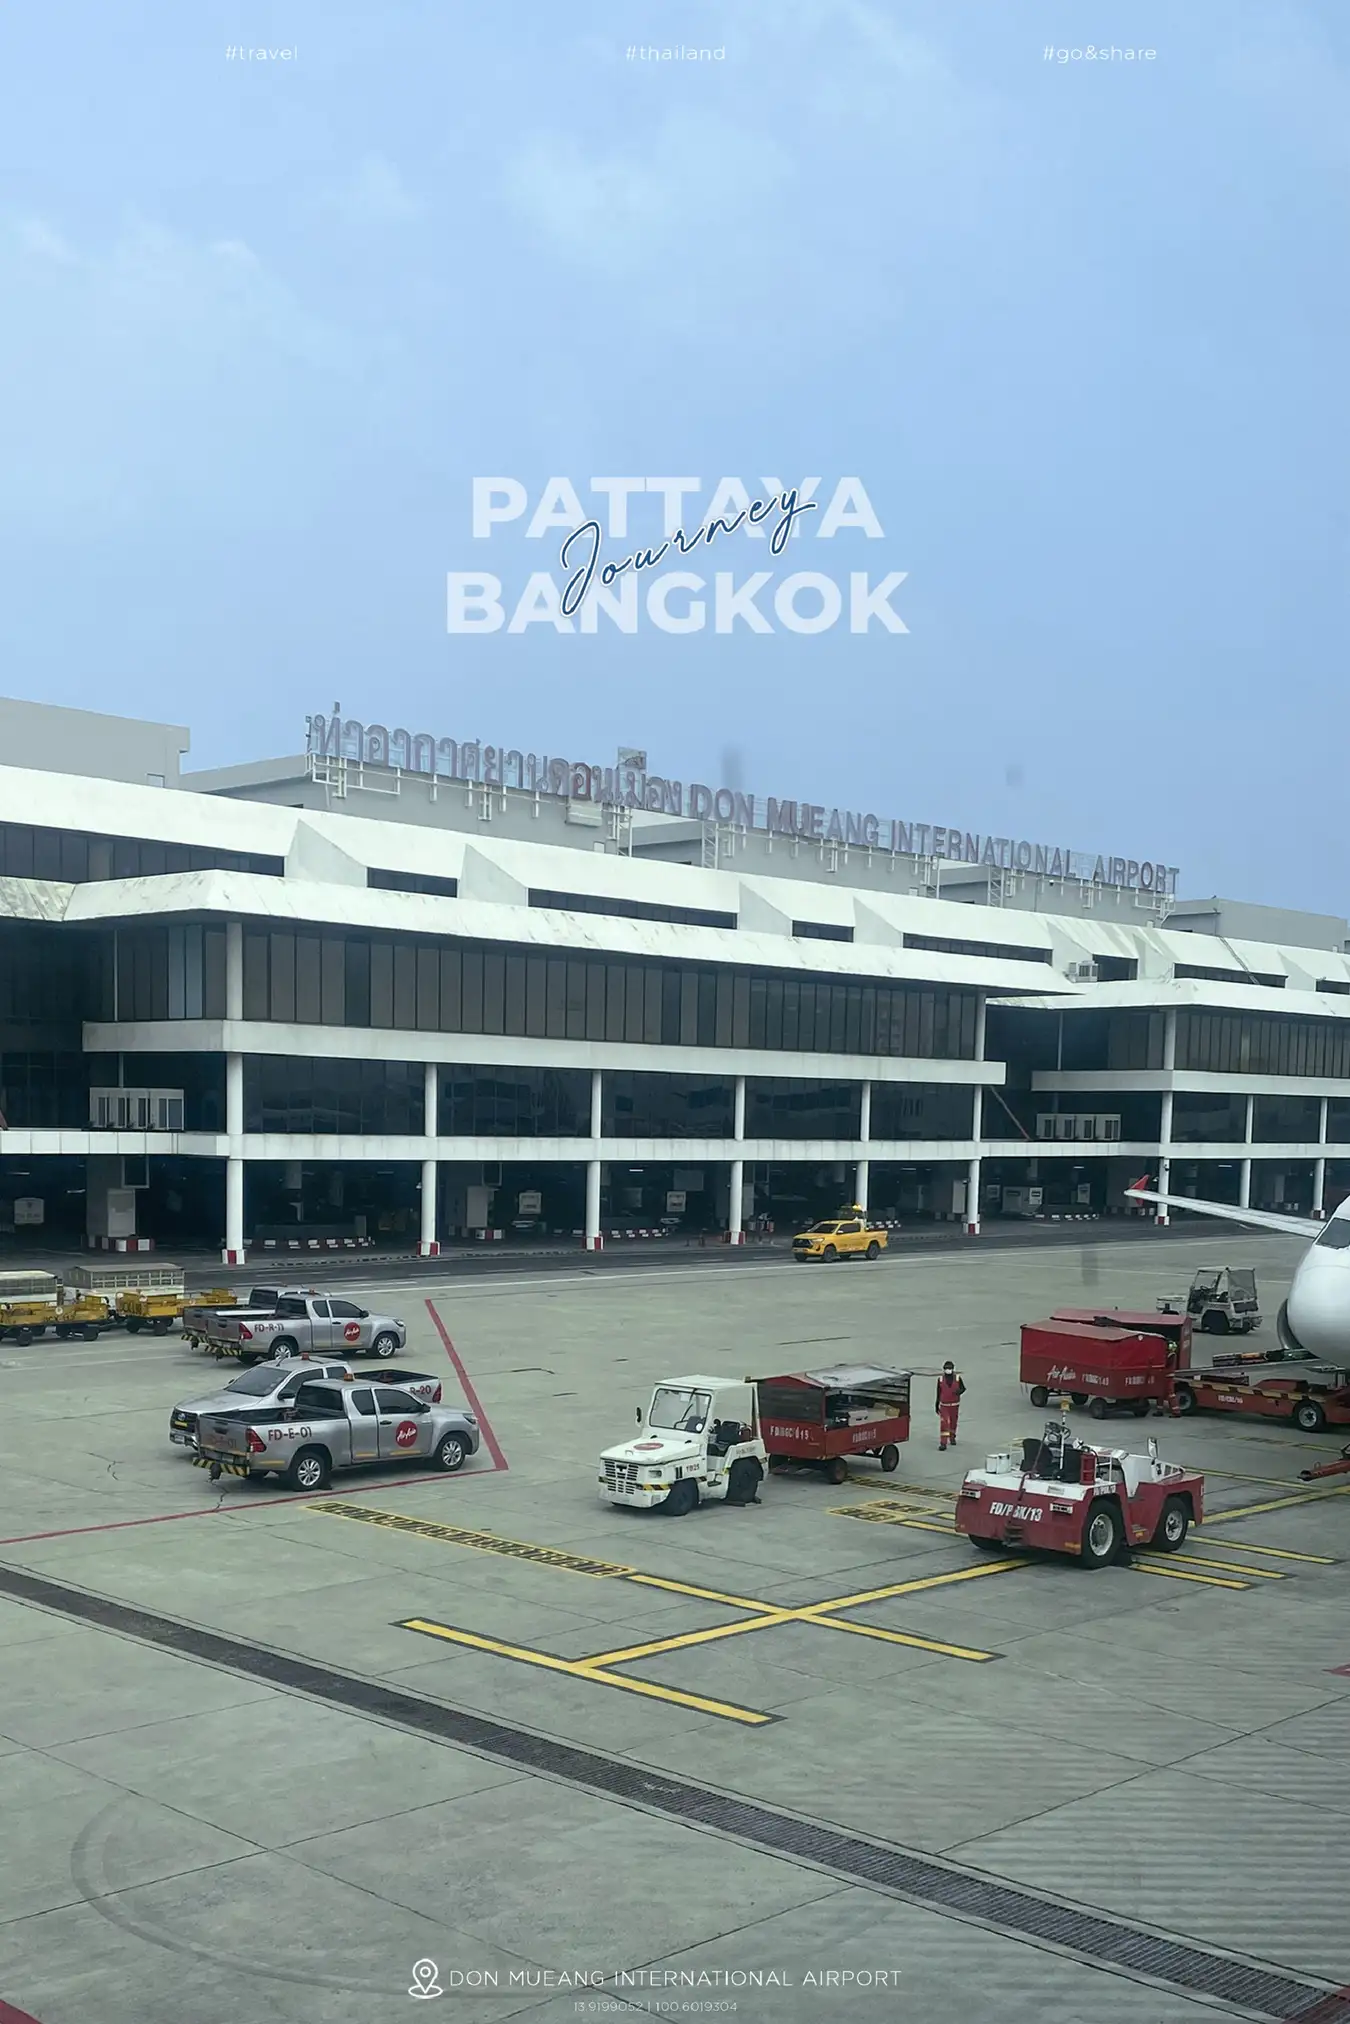 best places to visit in bangkok and pattaya